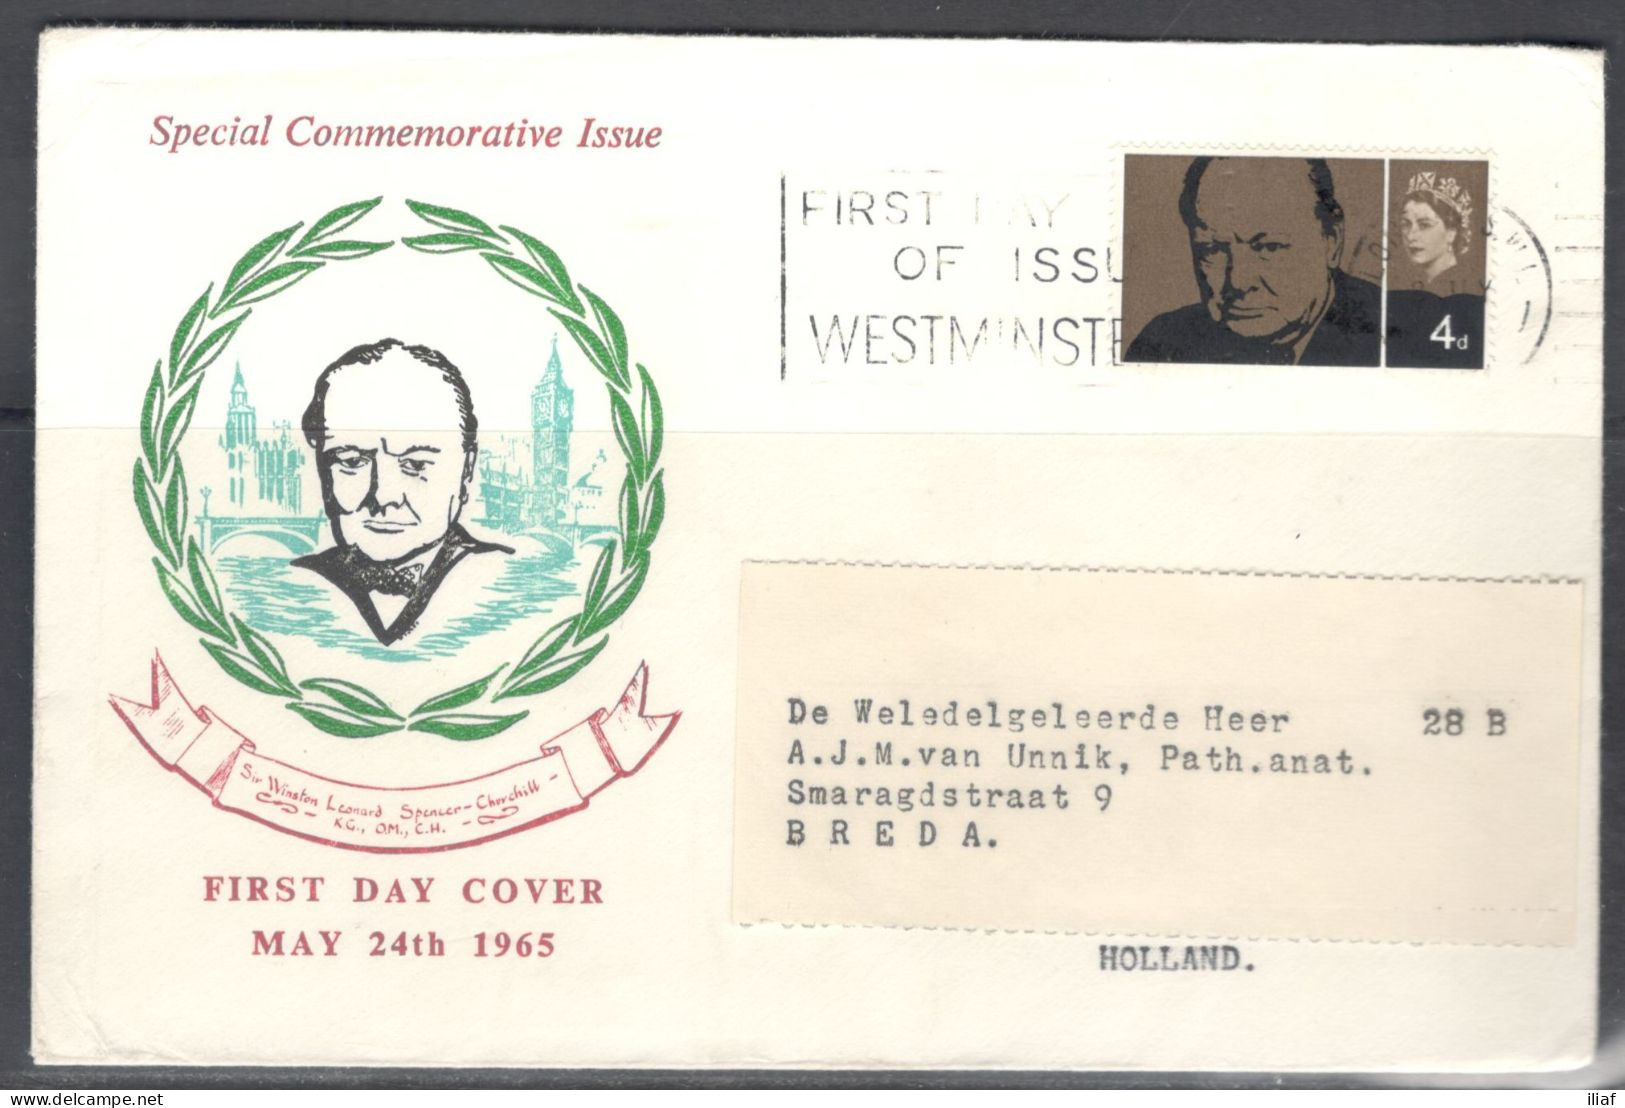 United Kingdom Of Great Britain.  FDC Sc. 420.  Sir Winston Churchill Commemoration   FDC Cancellation On FDC Envelope - 1952-1971 Pre-Decimal Issues